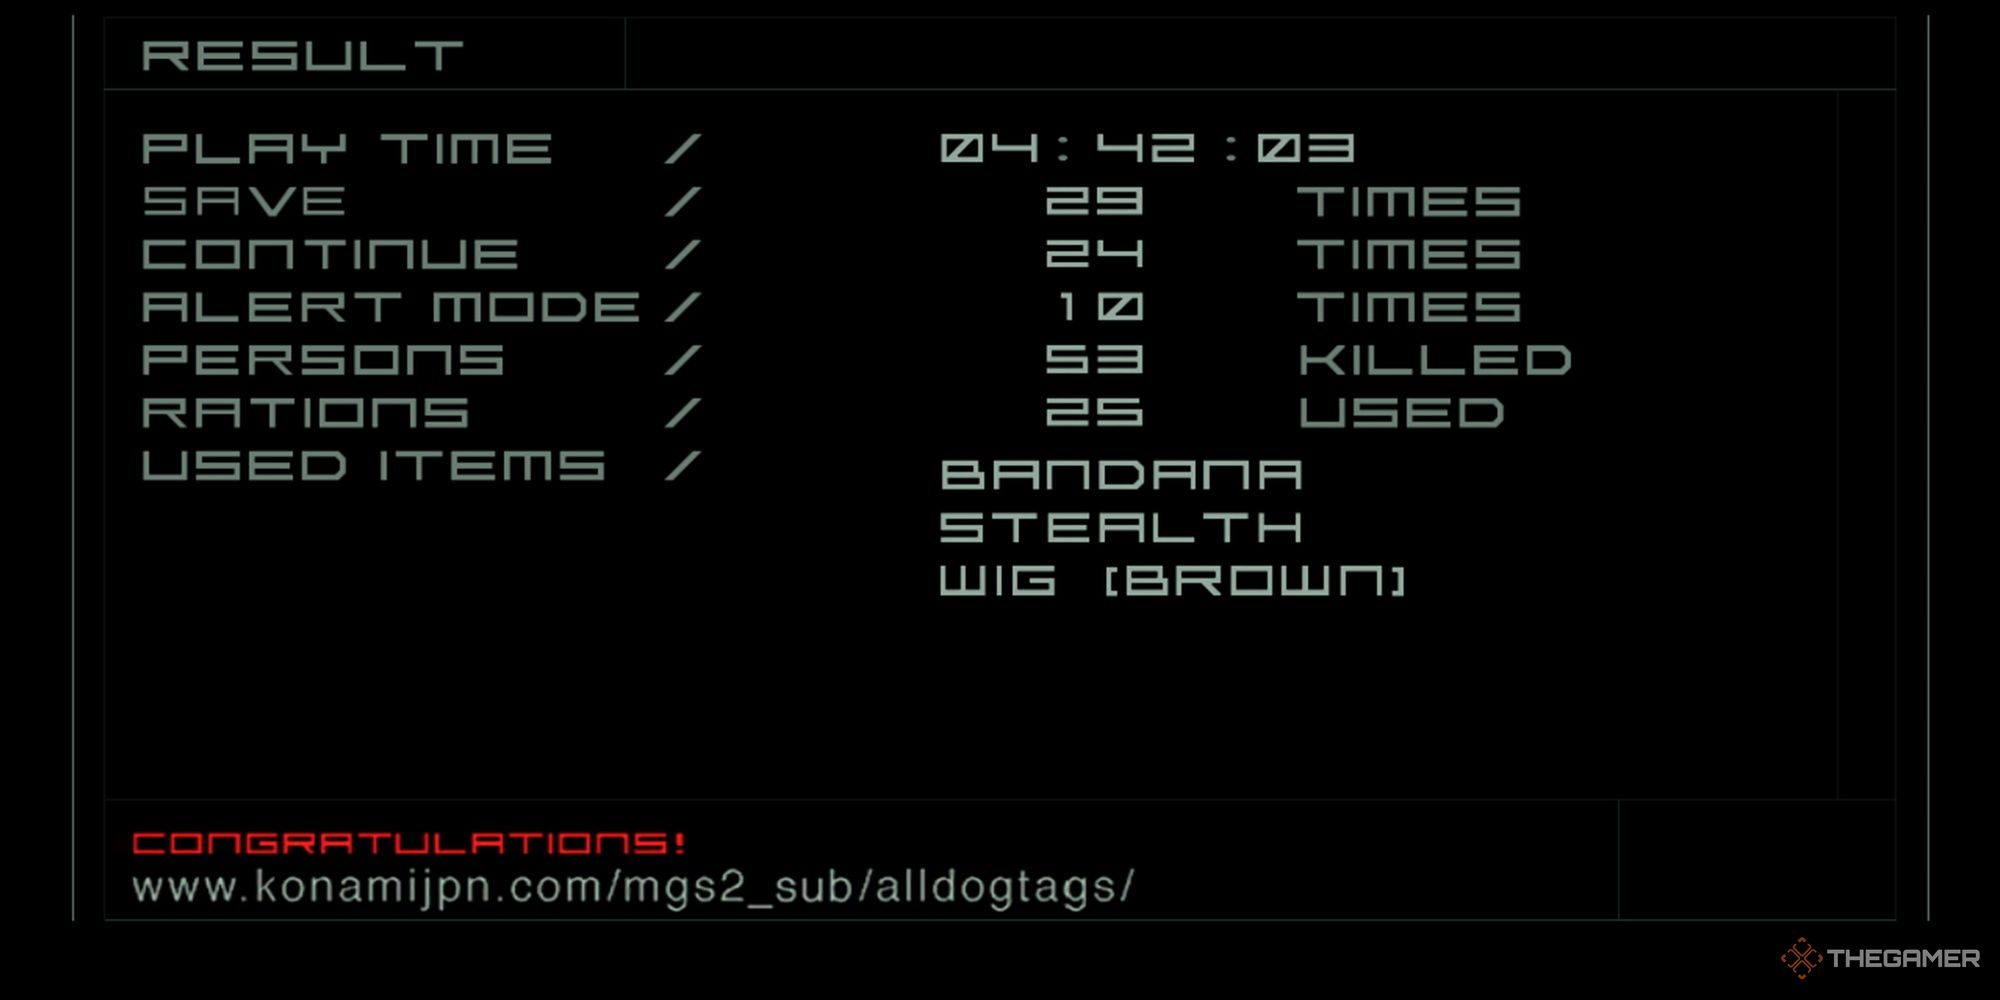 The end results screen of Metal Gear Solid 2 showing the Congratulations URL